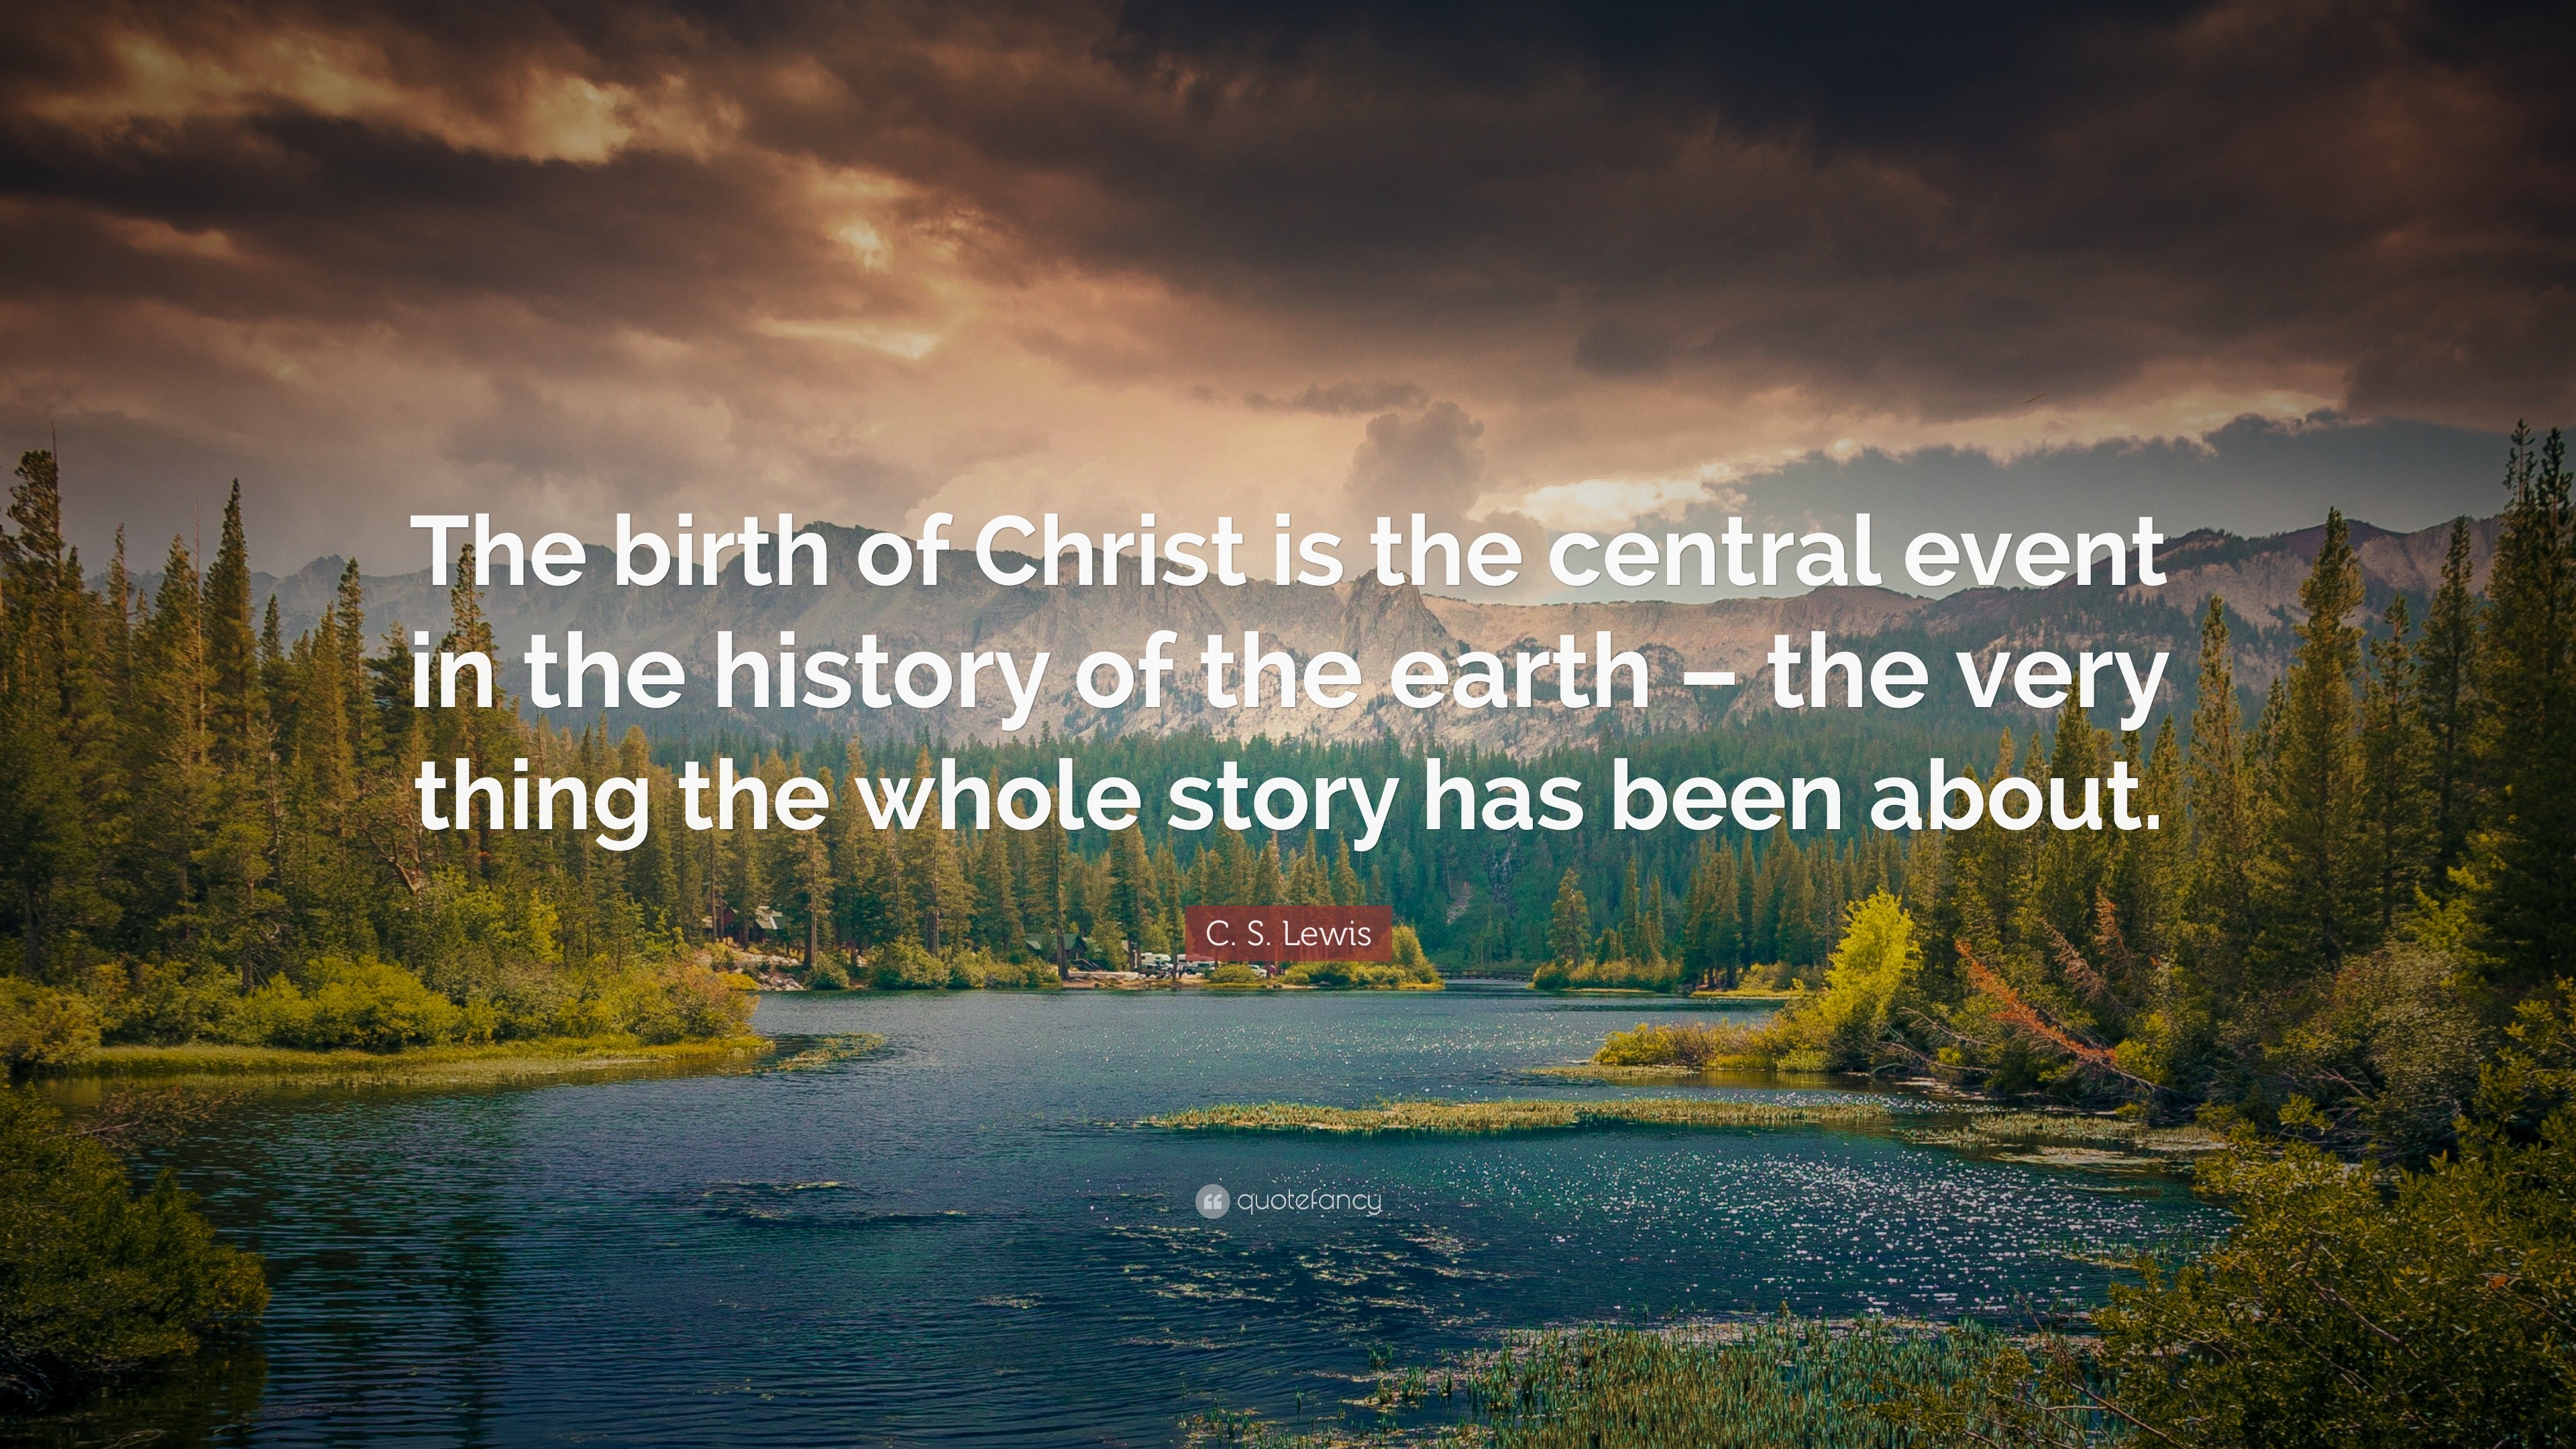 C. S. Lewis Quote: “The birth of Christ is the central event in the